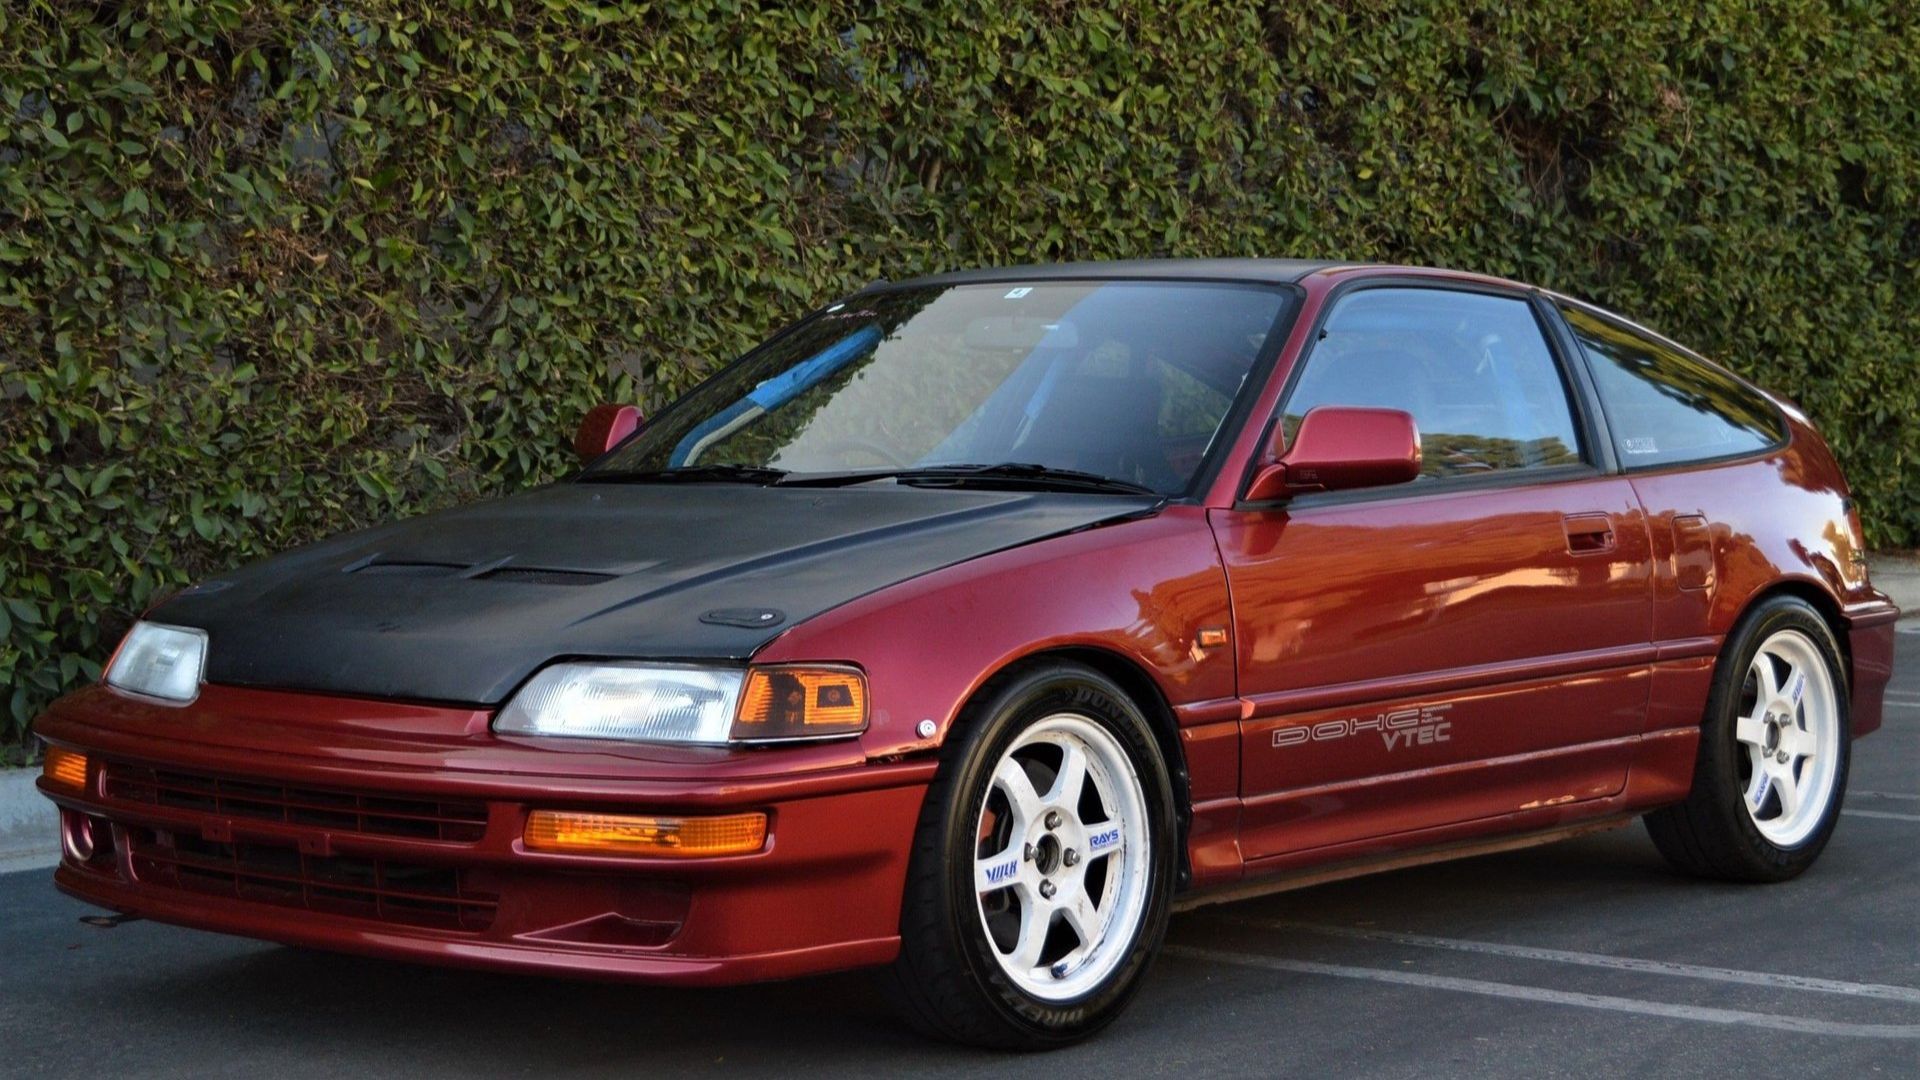 1991 Honda Crx Sir Is Ready For More Track Days